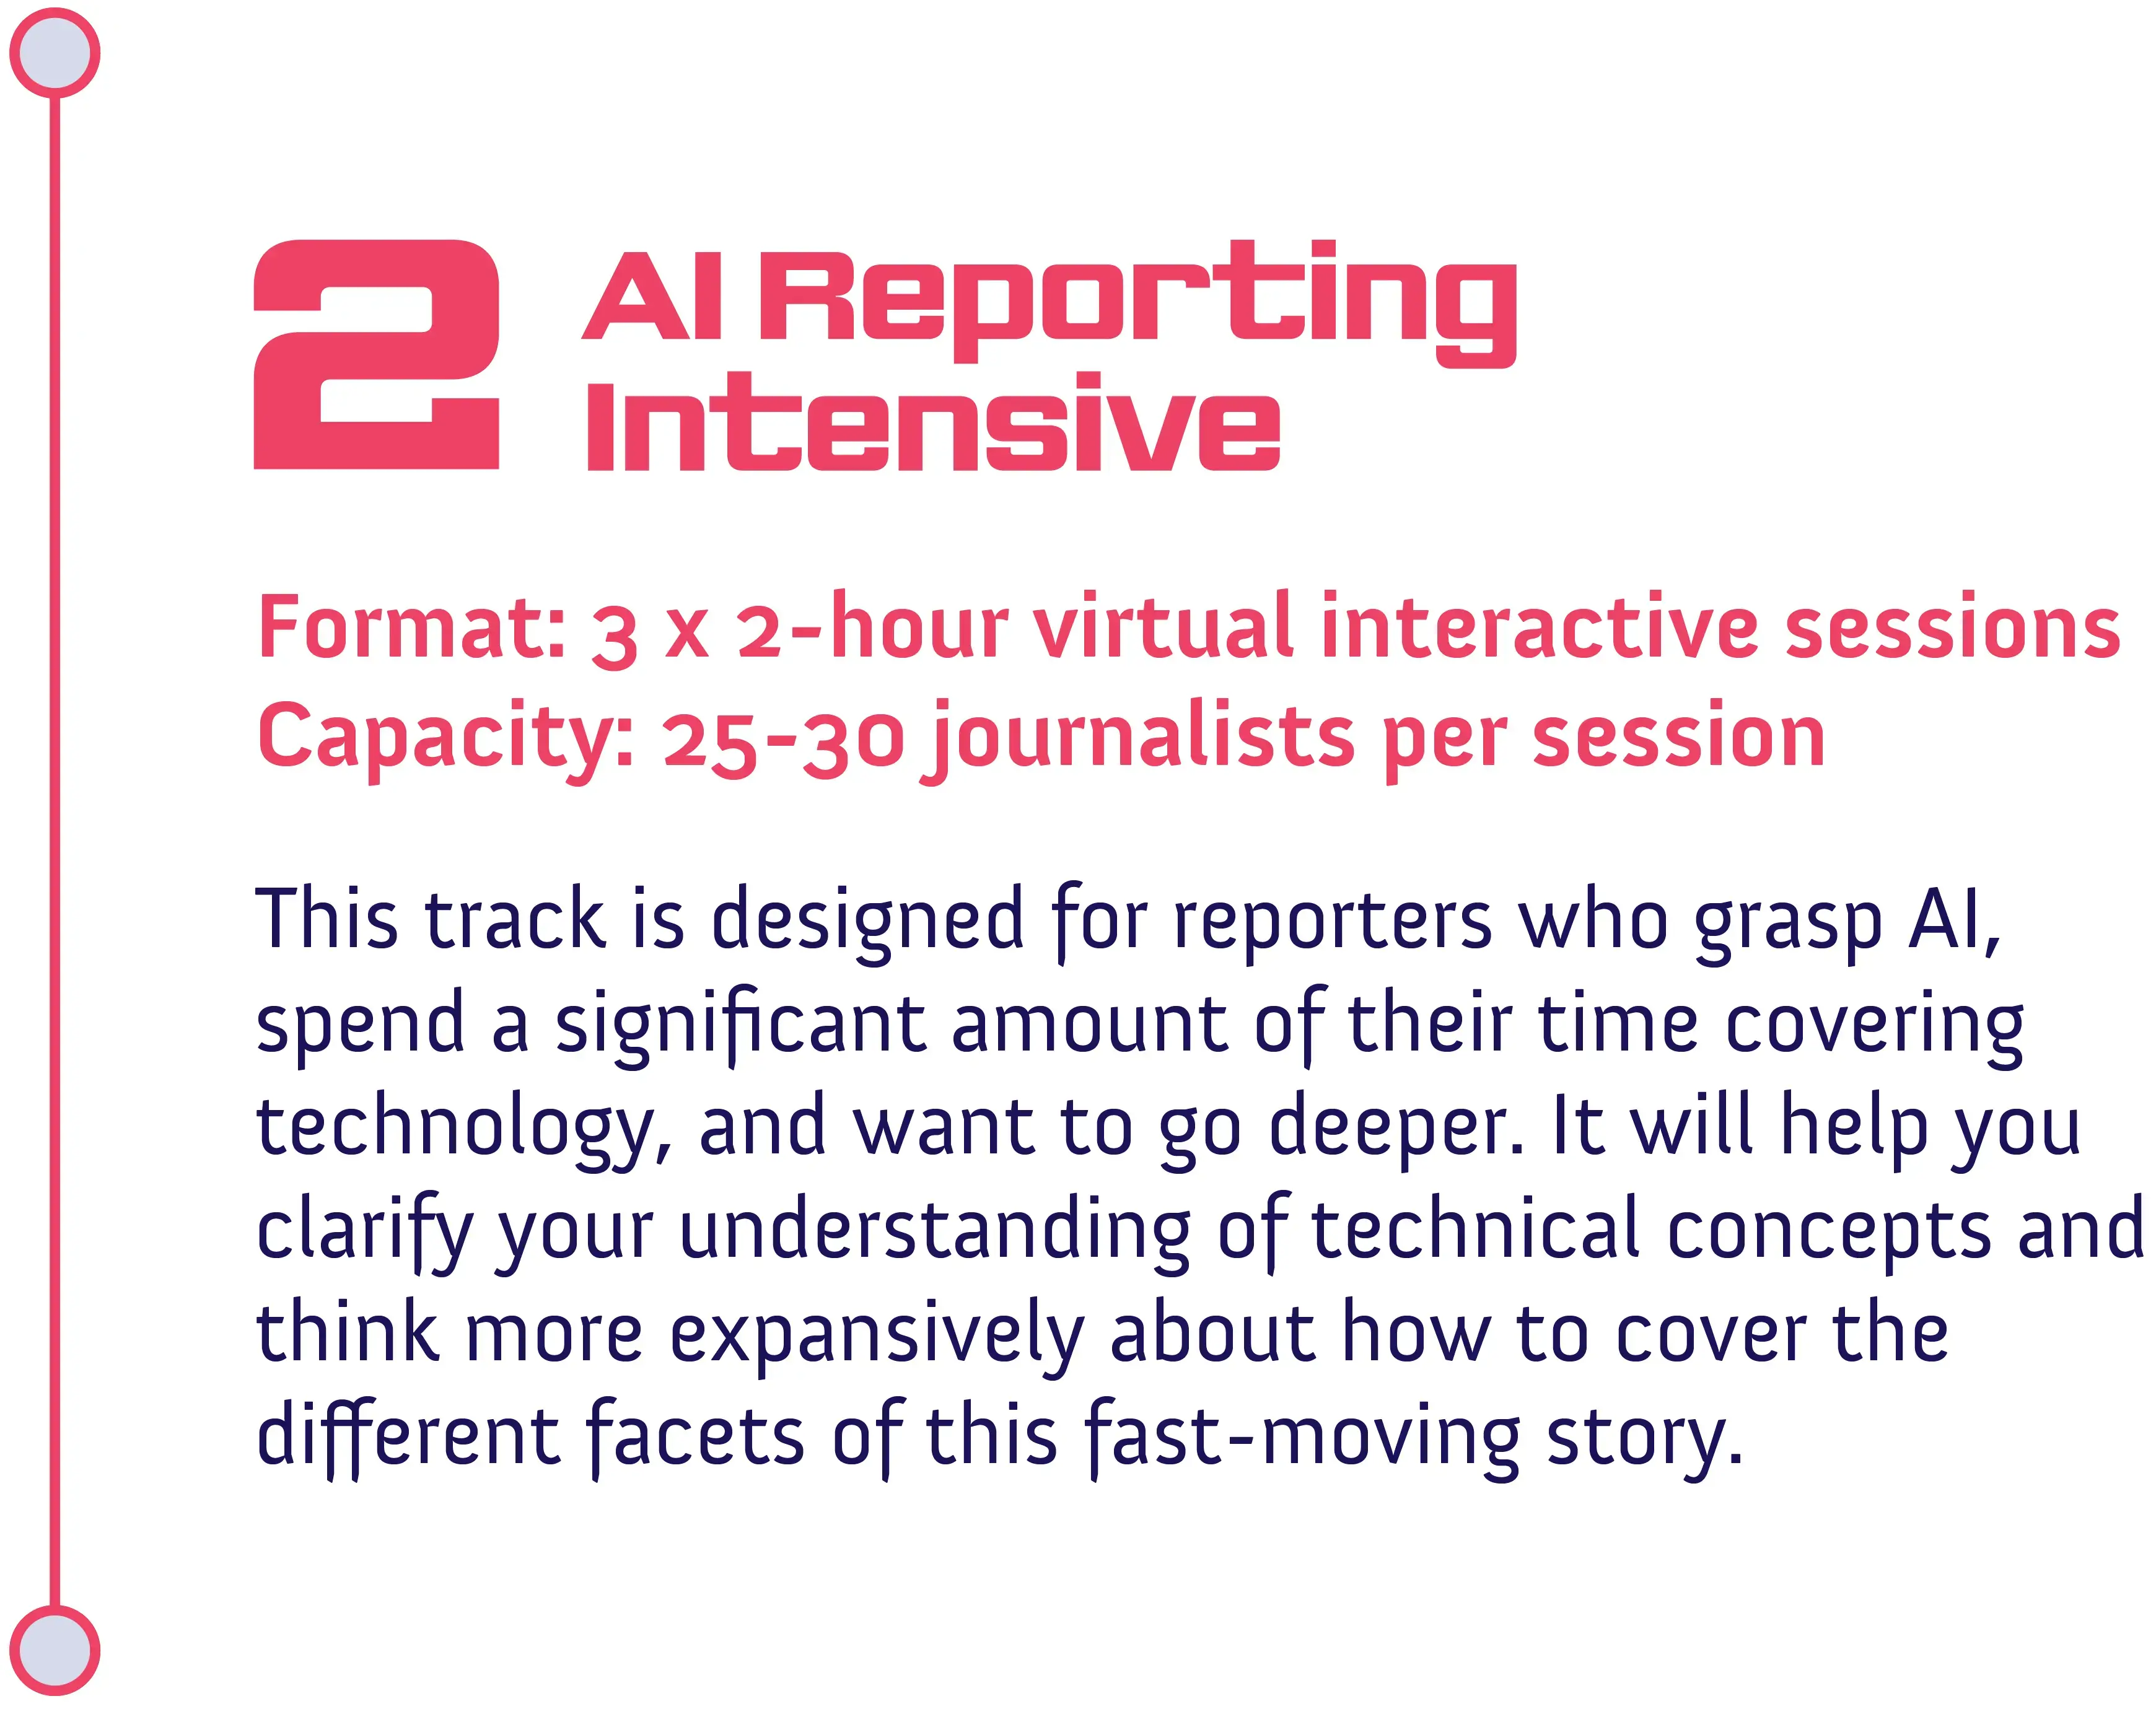 Track #2: AI Reporting Intensive<br />
Format: 3 x 2-hour virtual interactive sessions<br />
Capacity: 25-30 journalists per session</p>
<p>This track is designed for reporters who grasp AI, spend a significant amount of their time covering technology, and want to go deeper. It will help you clarify your understanding of technical concepts and think more expansively about how to cover the different facets of this fast-moving story.